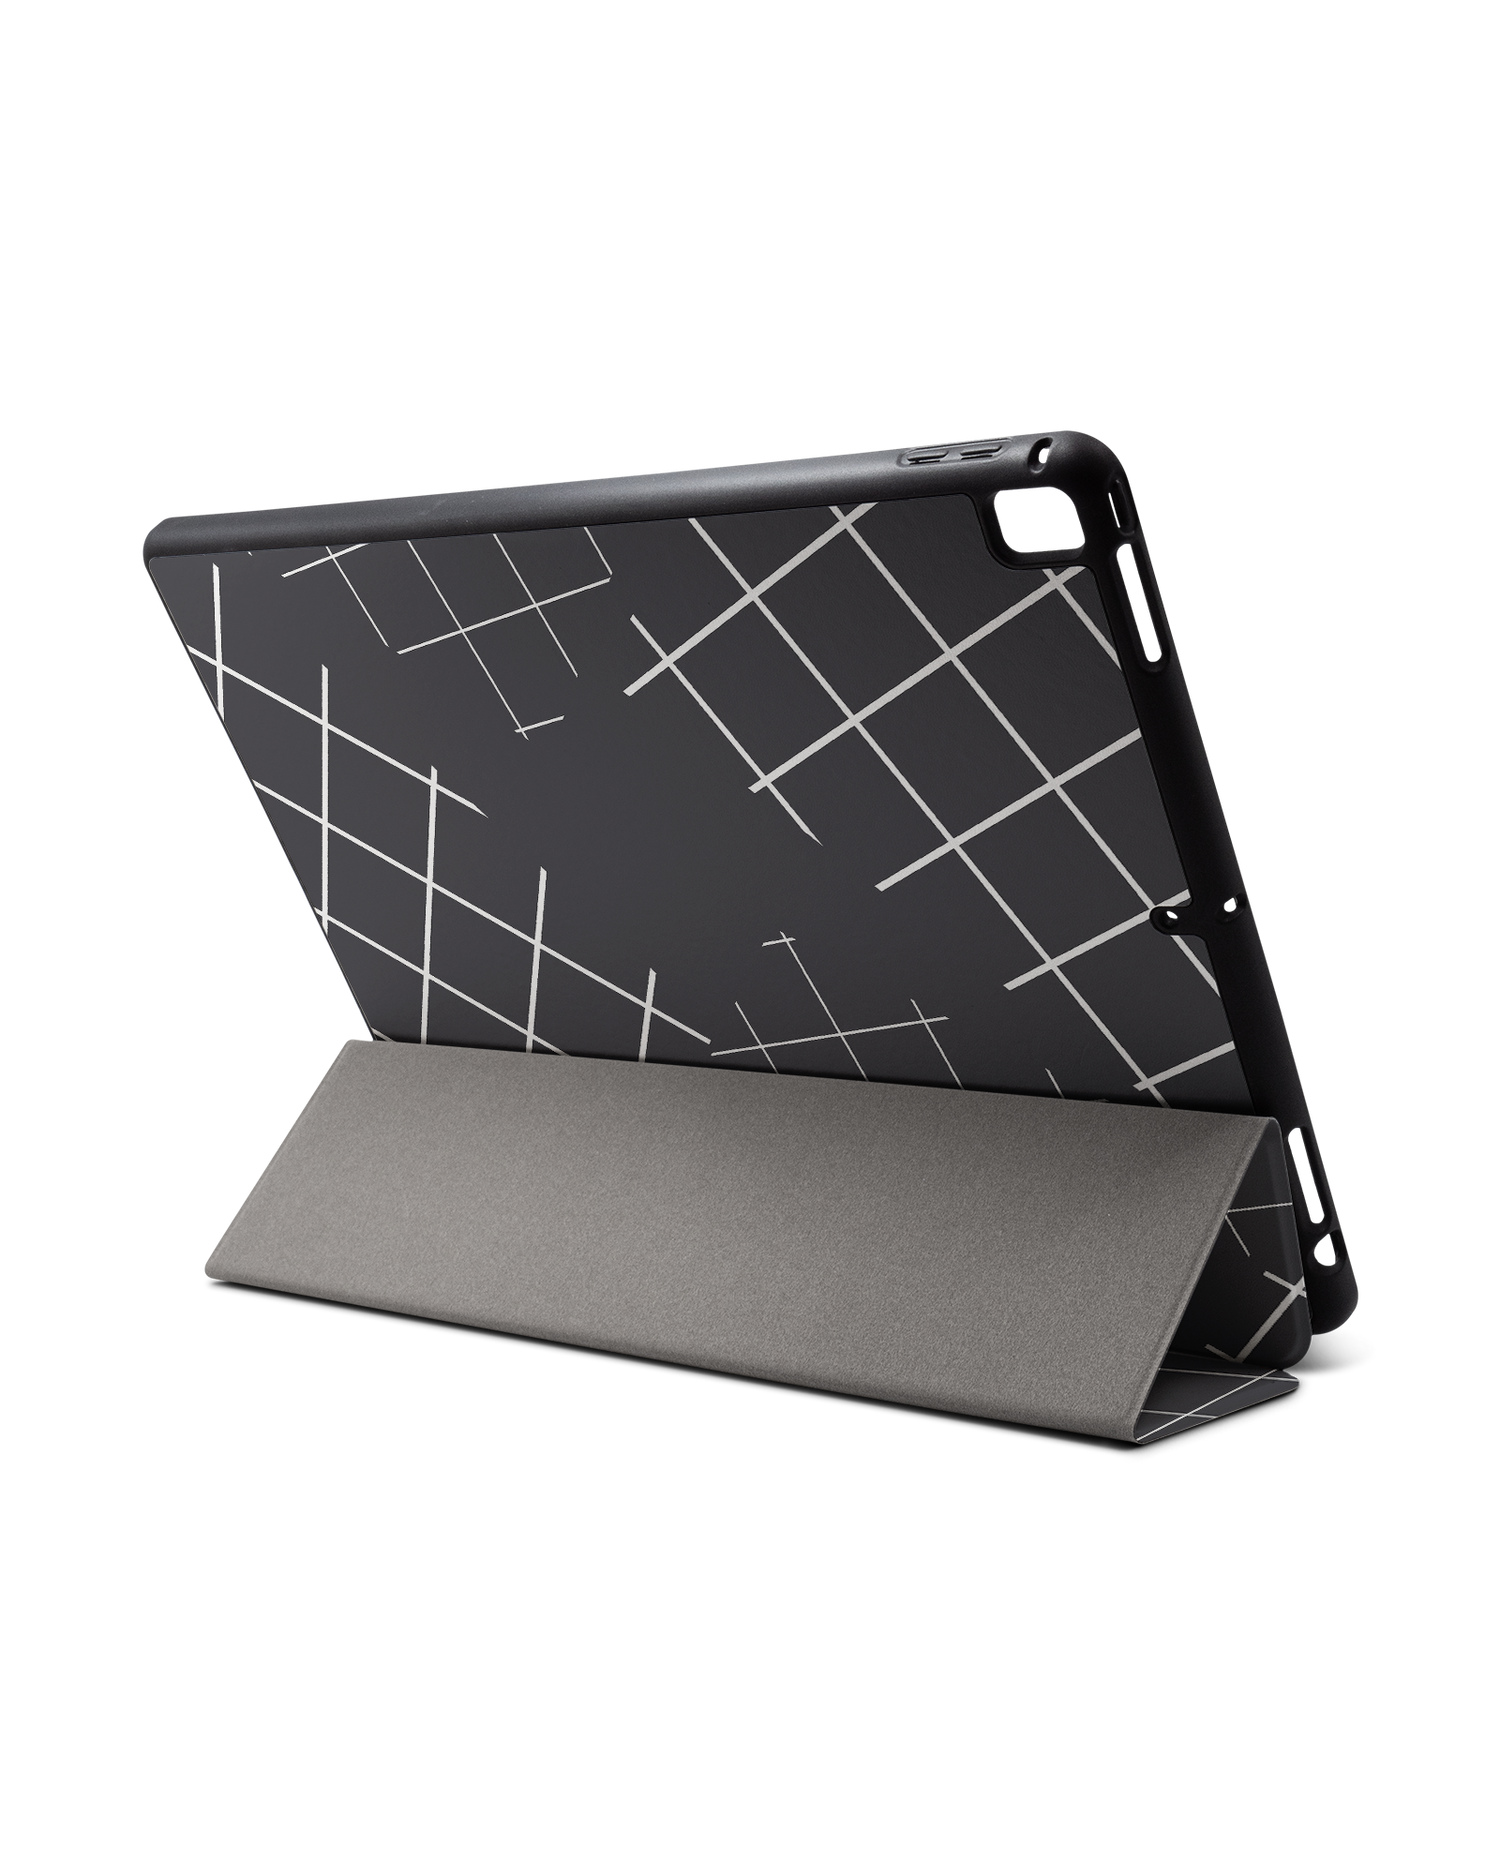 Grids iPad Case with Pencil Holder for Apple iPad Pro 2 12.9